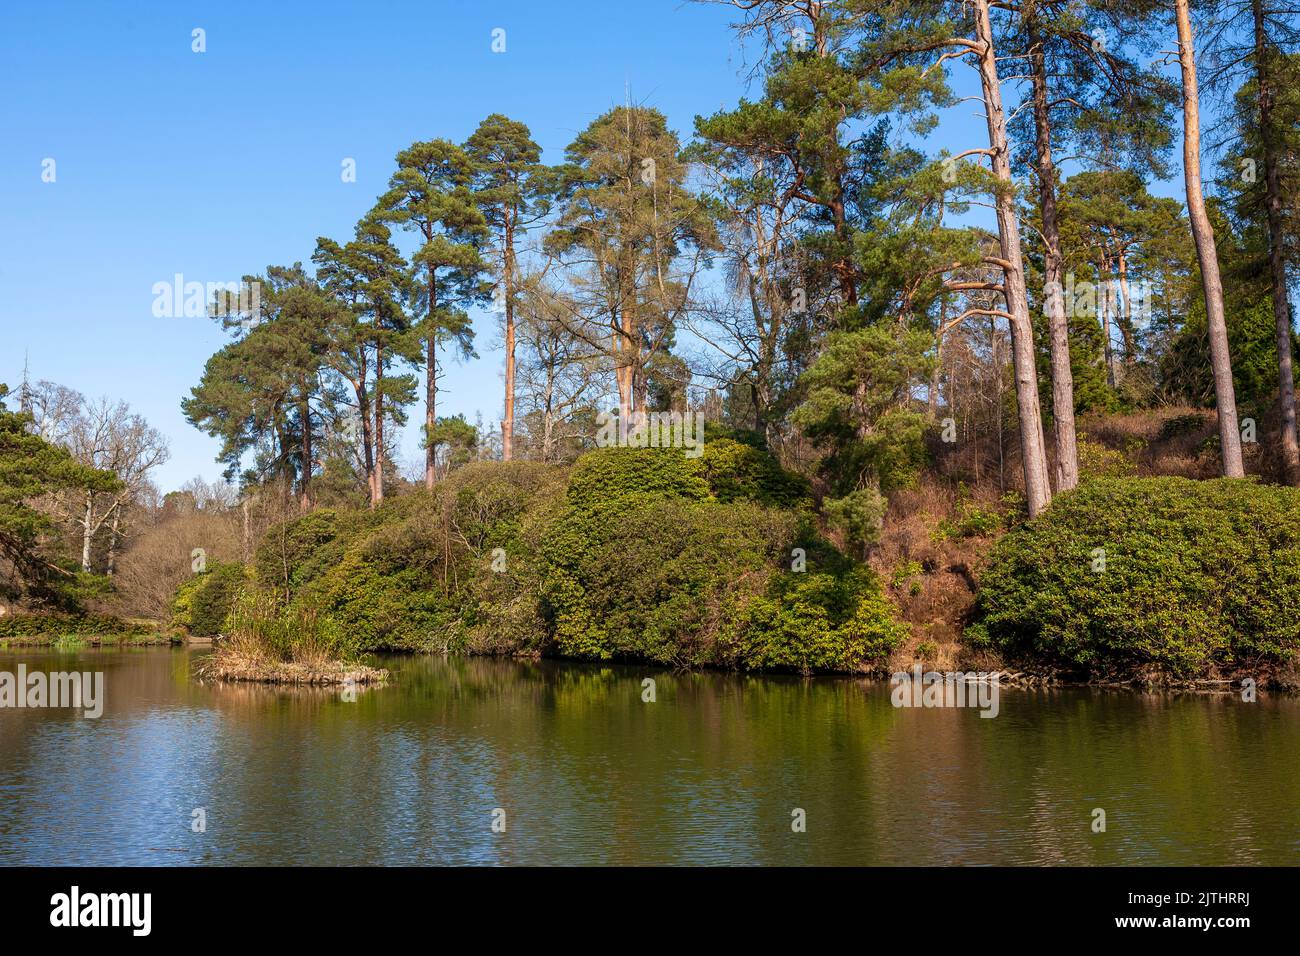 The Top Ponds at Leonardslee Gardens, West Sussex, England, UK, on a fine Spring day Stock Photo